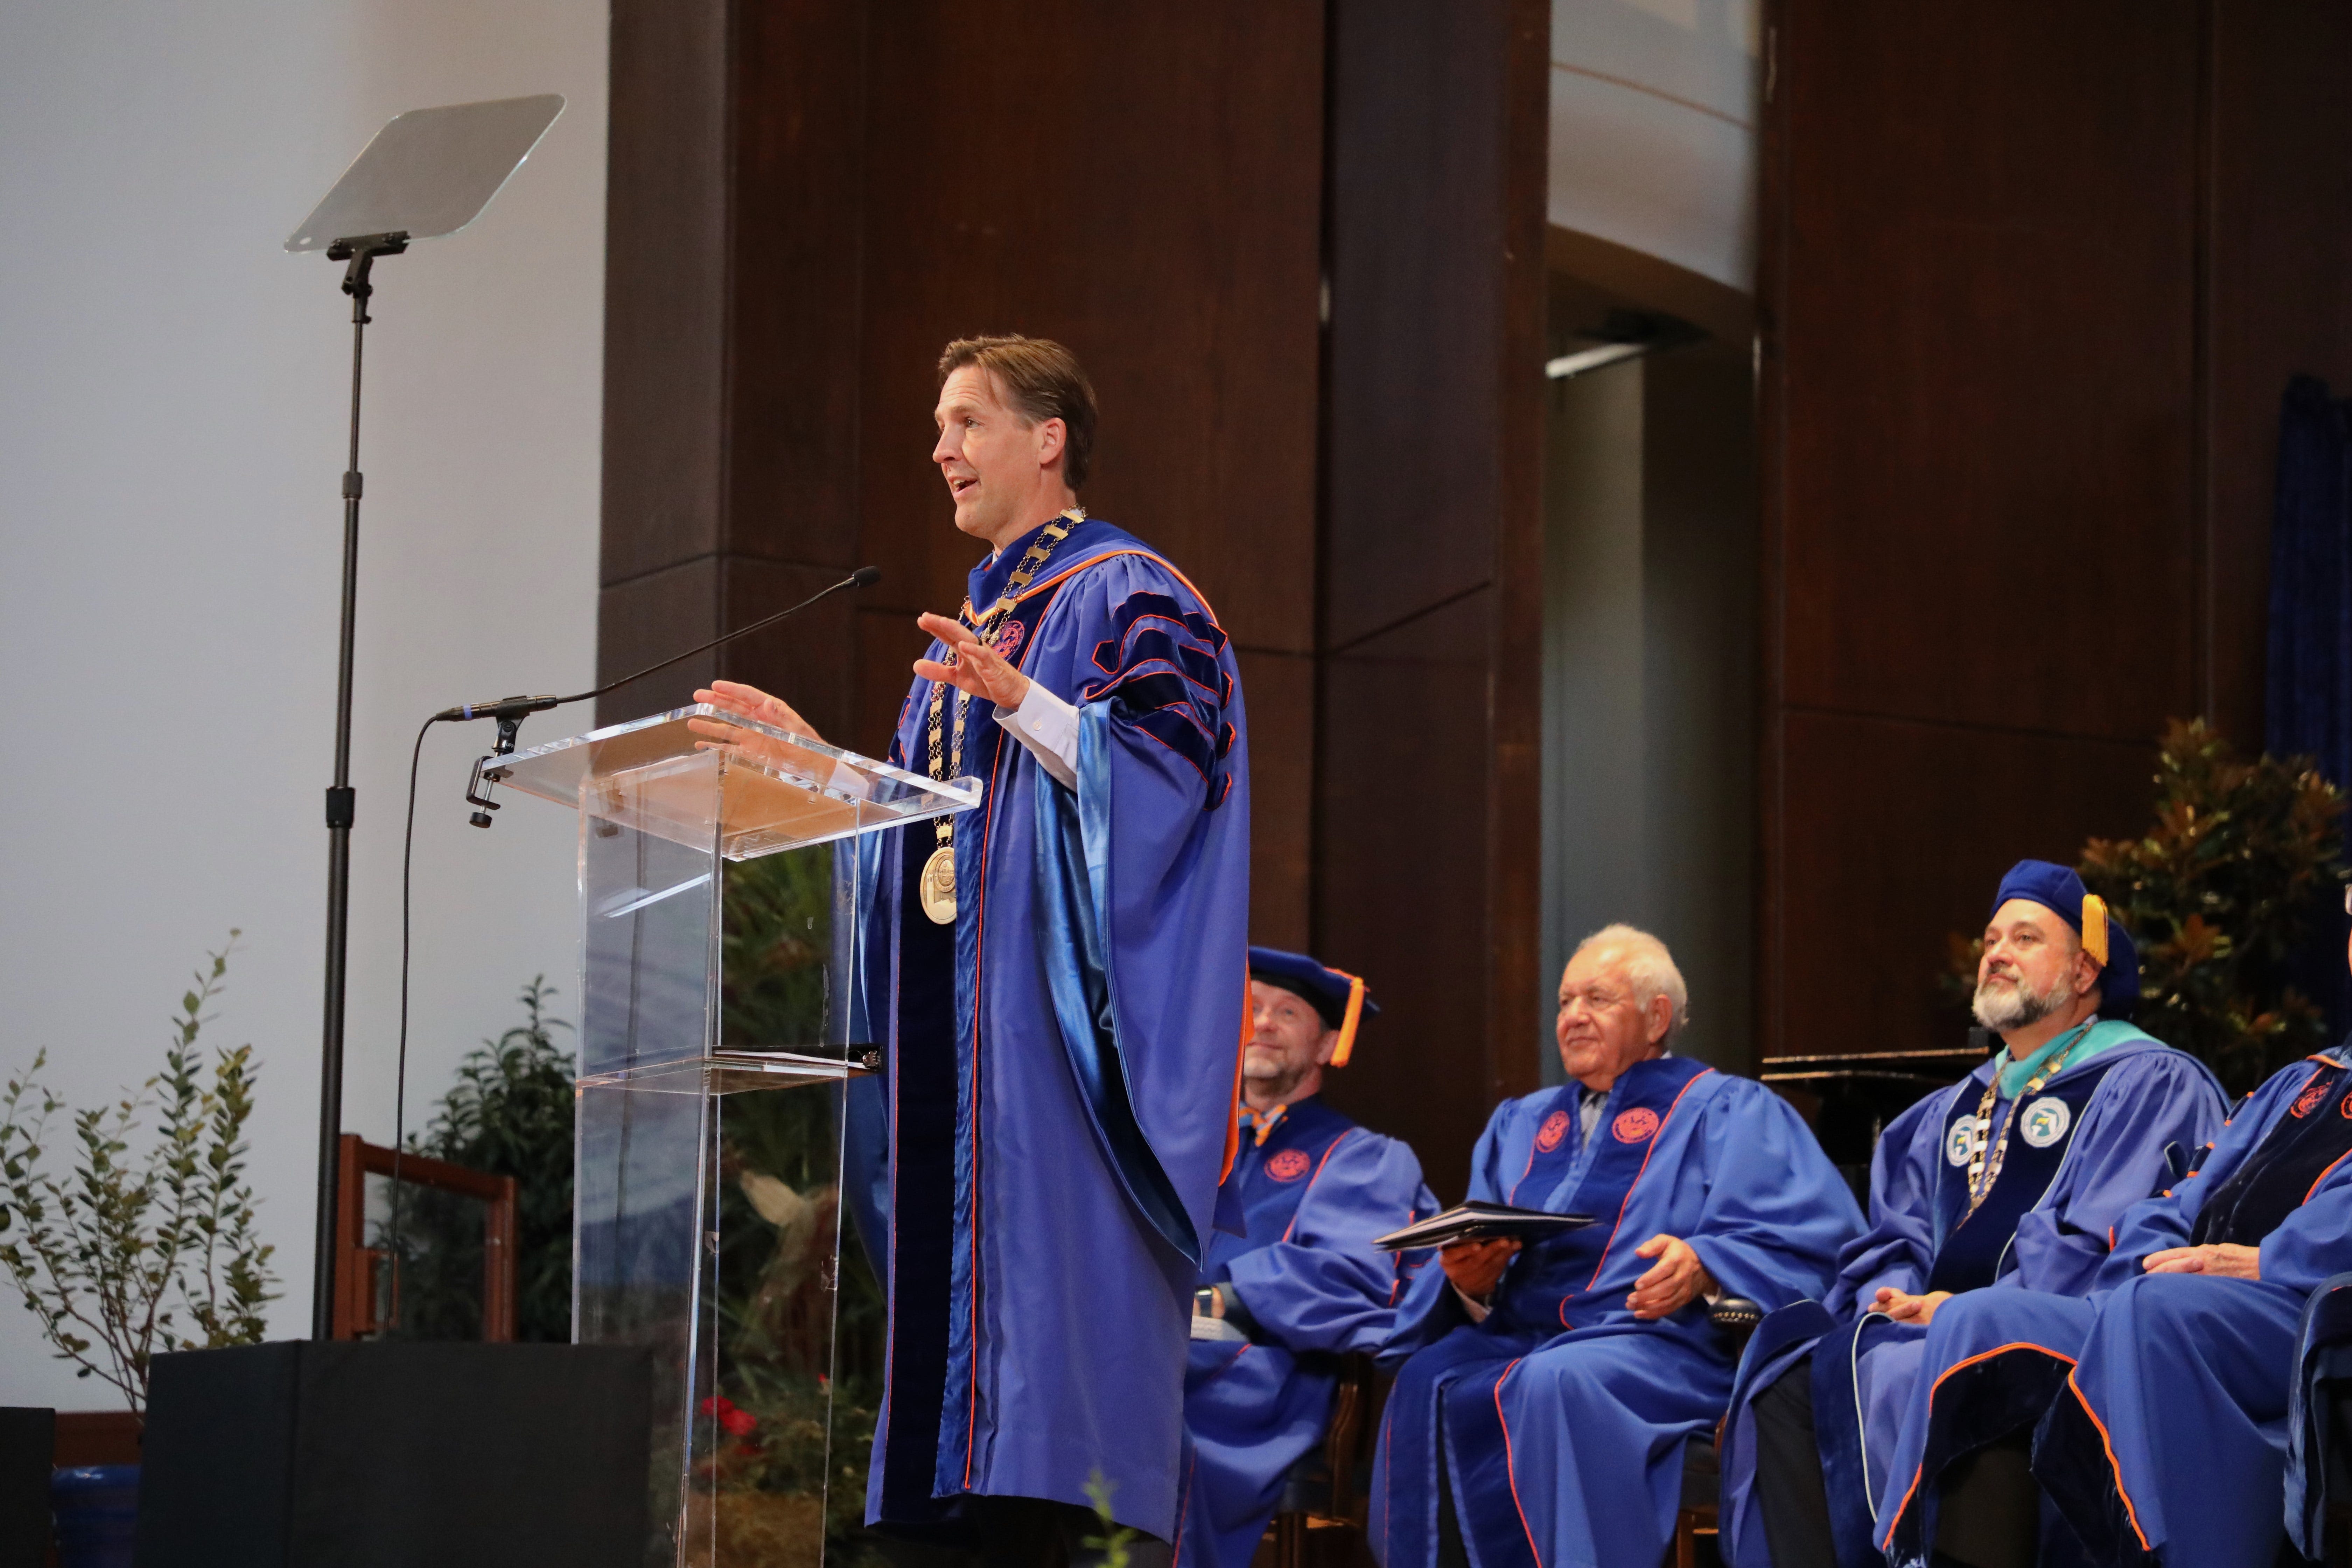 UF President Ben Sasse suddenly announced he was resigning. Here's what else we know.